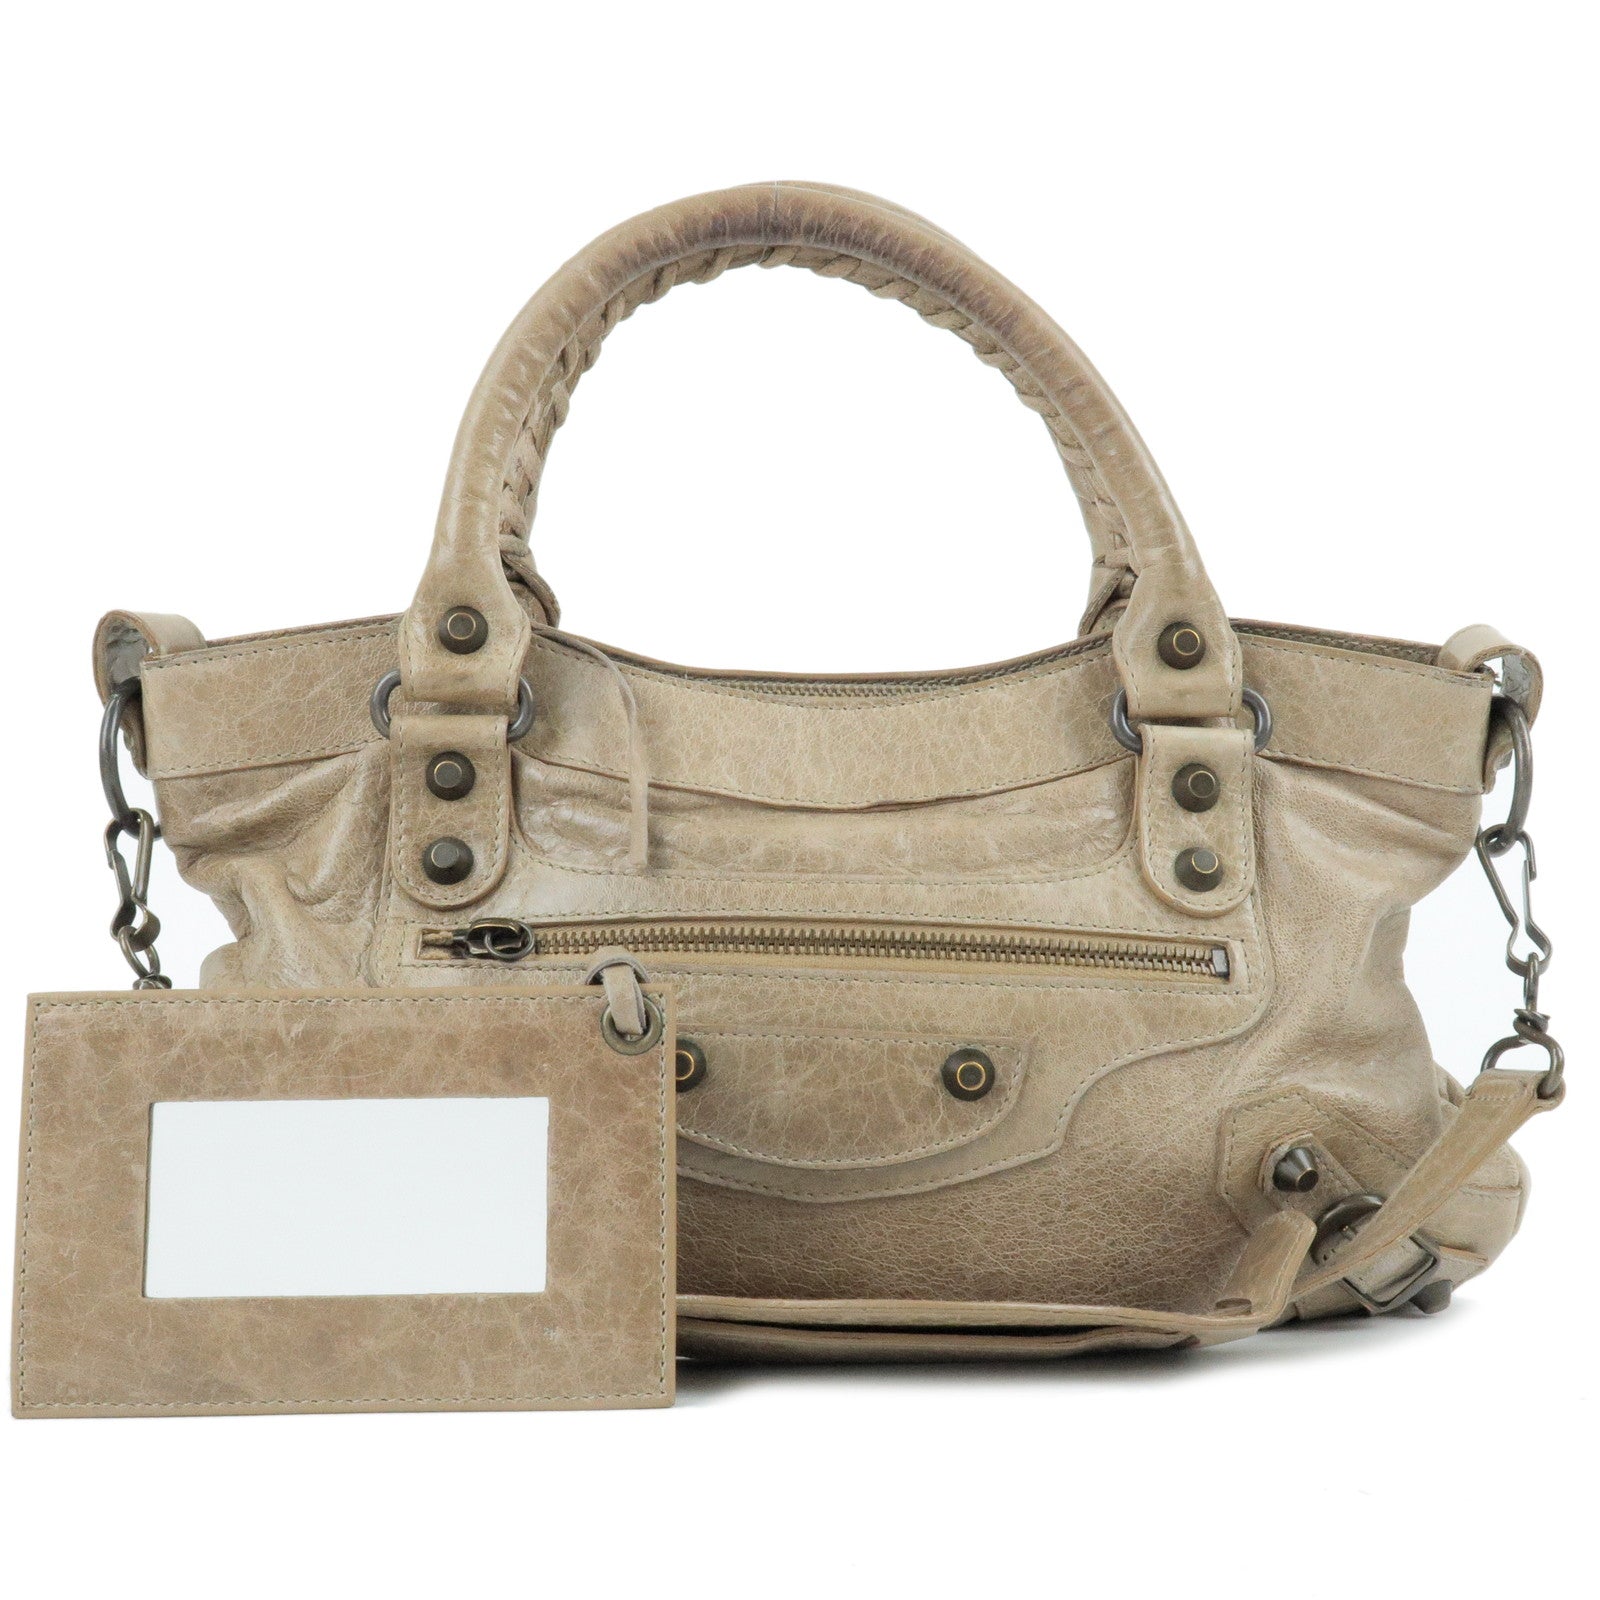 MICHAEL KORS: Voyager Michael bag in grained leather - Beige